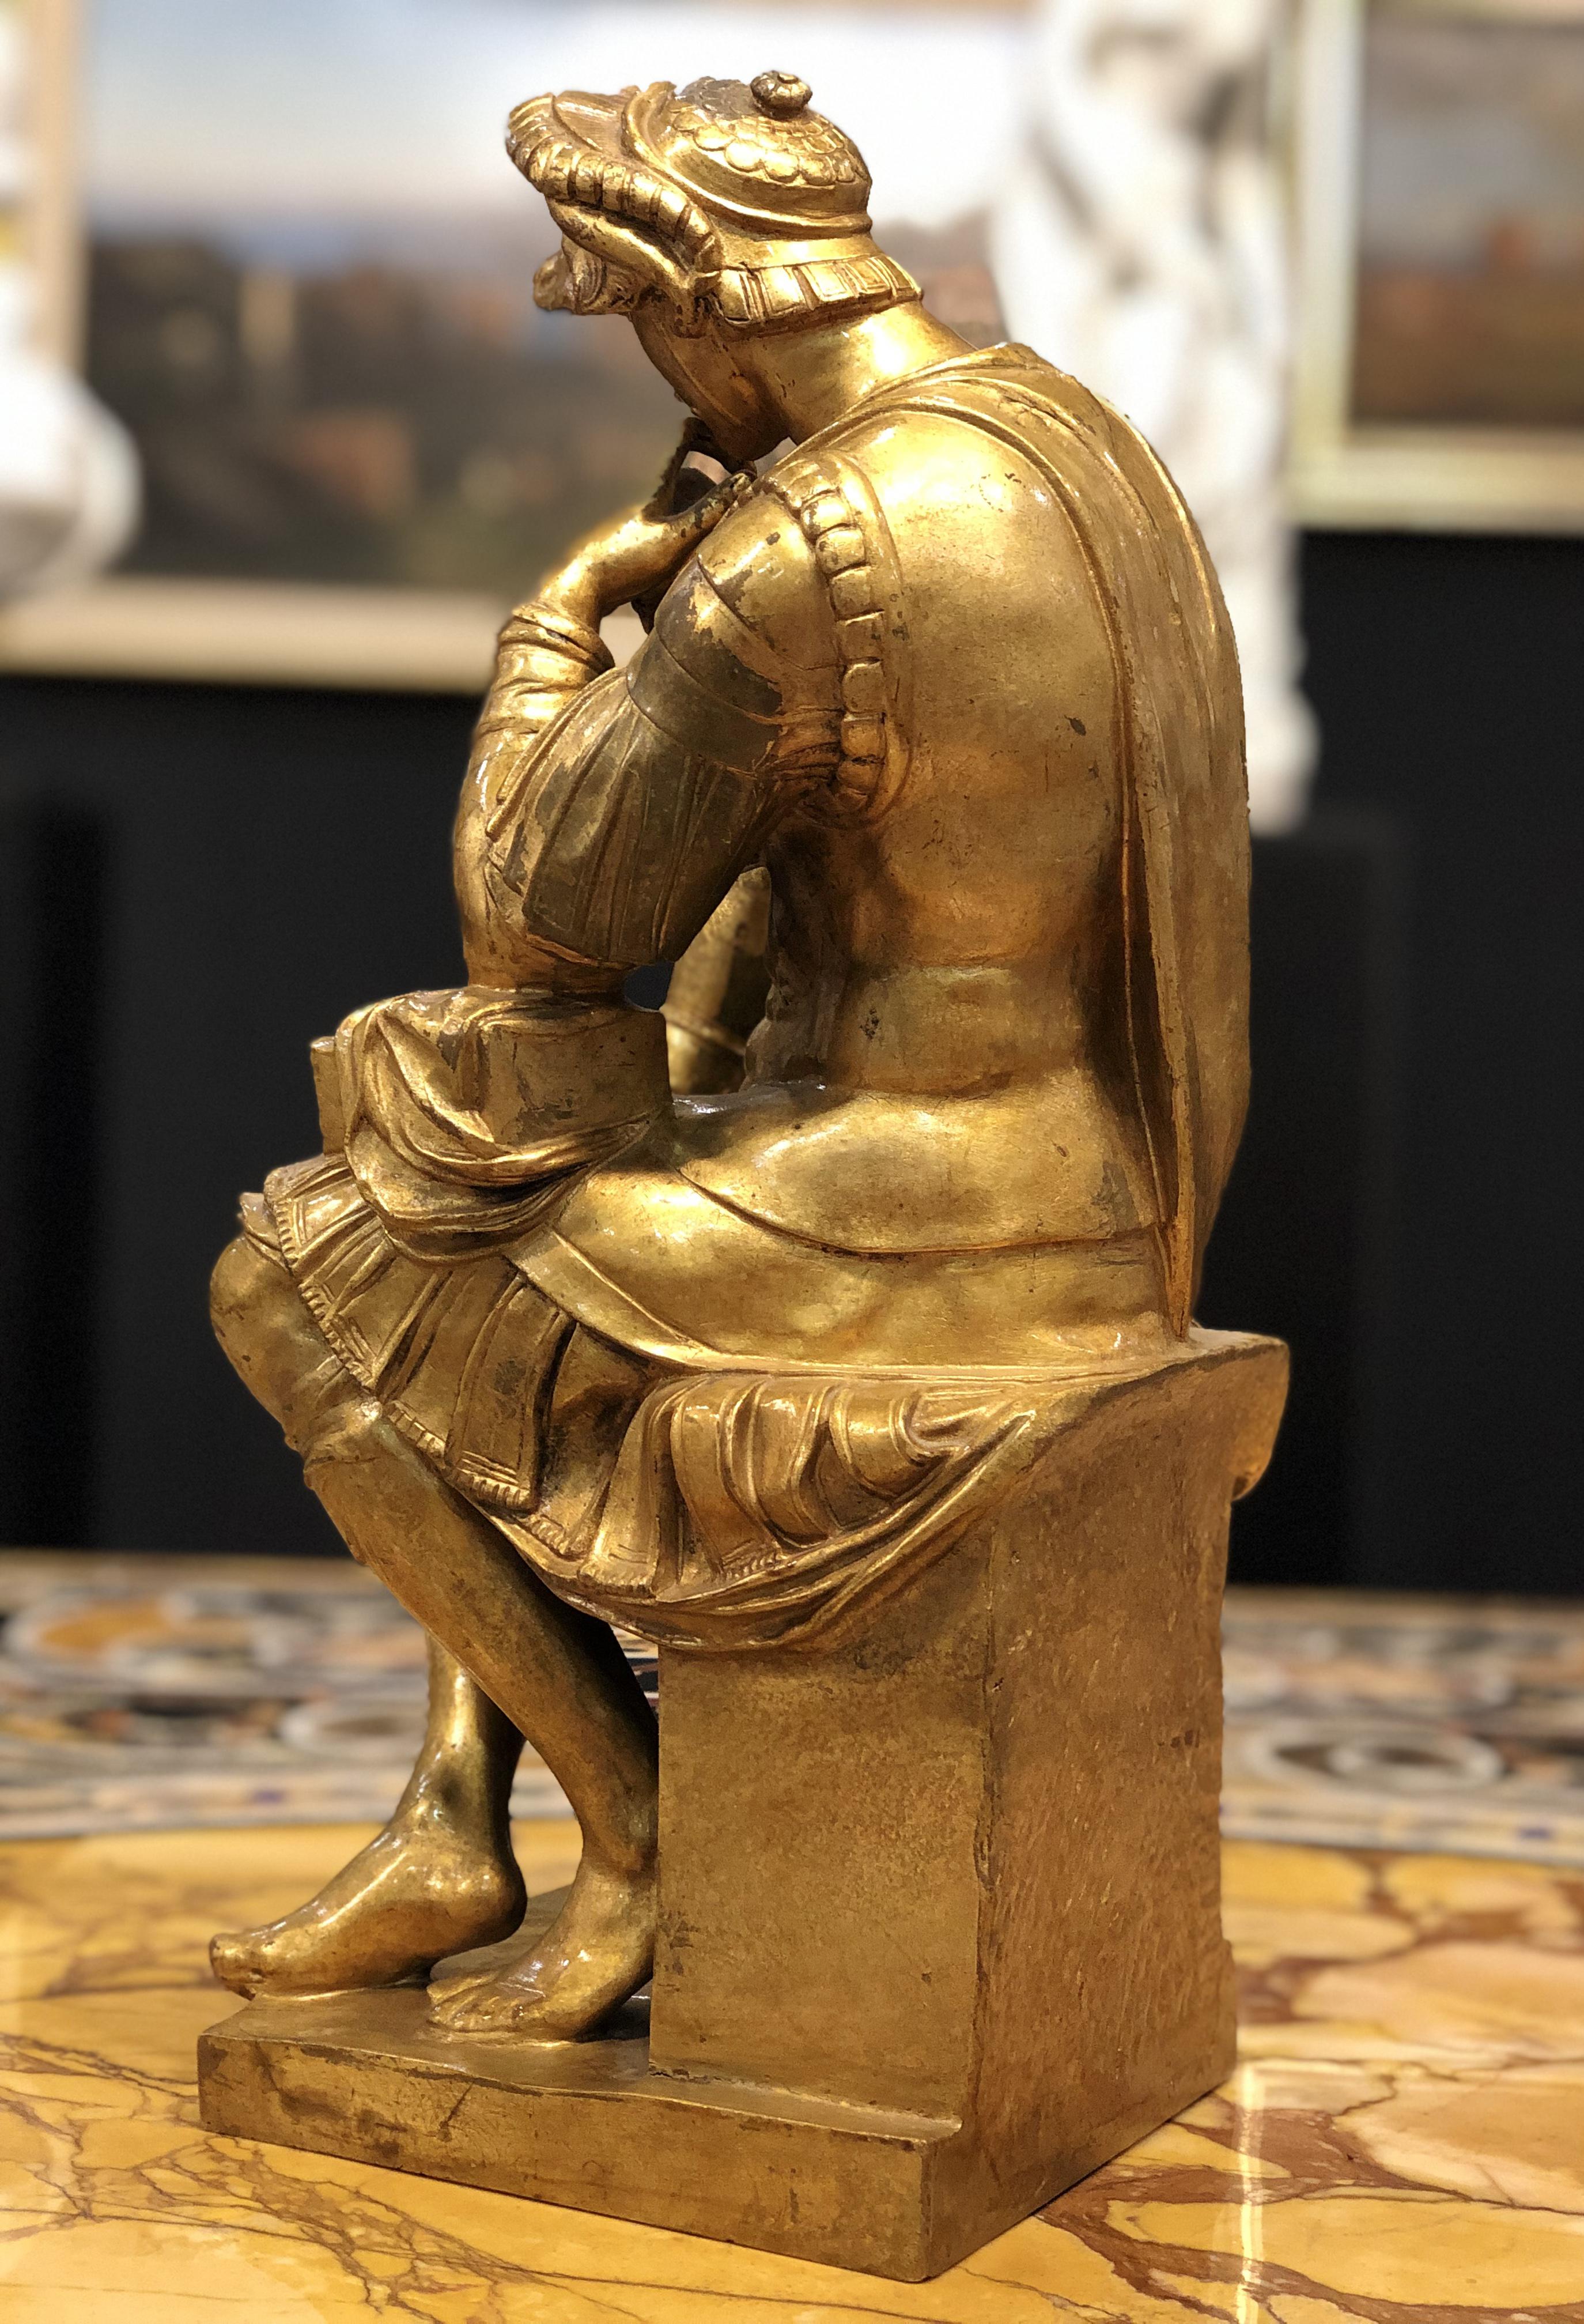 Neoclassical 19th Century after Michelangelo French Sculpture Gold Bronze Barbedienne Signed